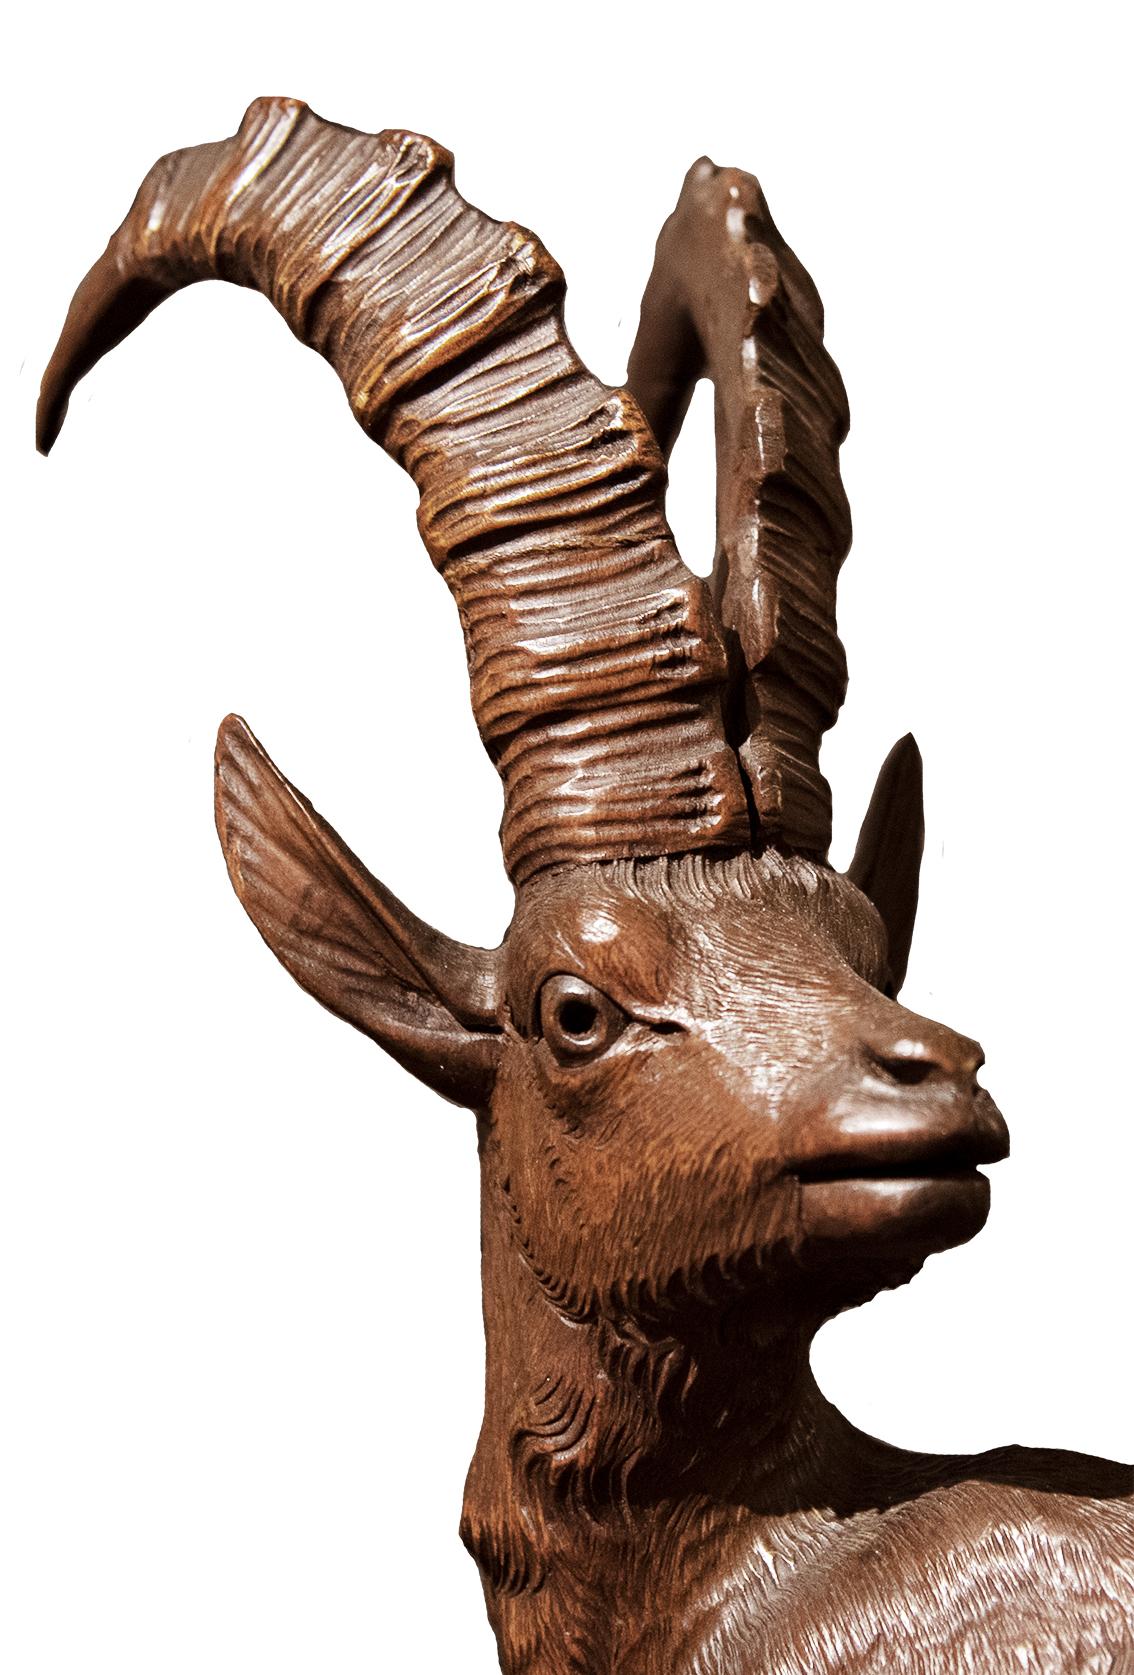 Swiss Double Ibex Black Forest Sculpture For Sale